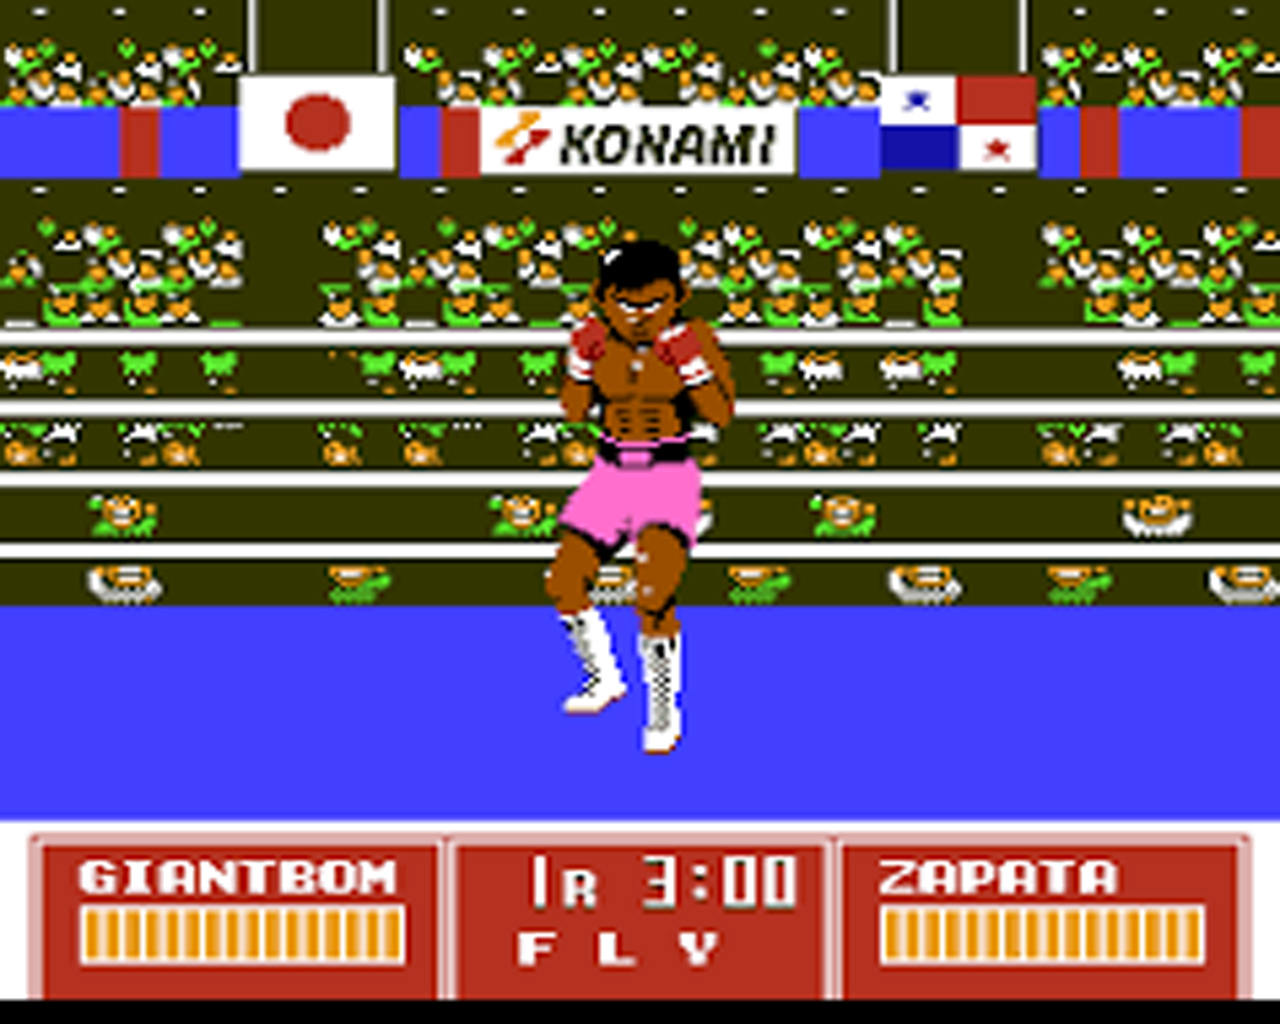 United boxing game. NES games Boxing. Exciting Boxing Денди. NES games ROM. Бокс java игра.